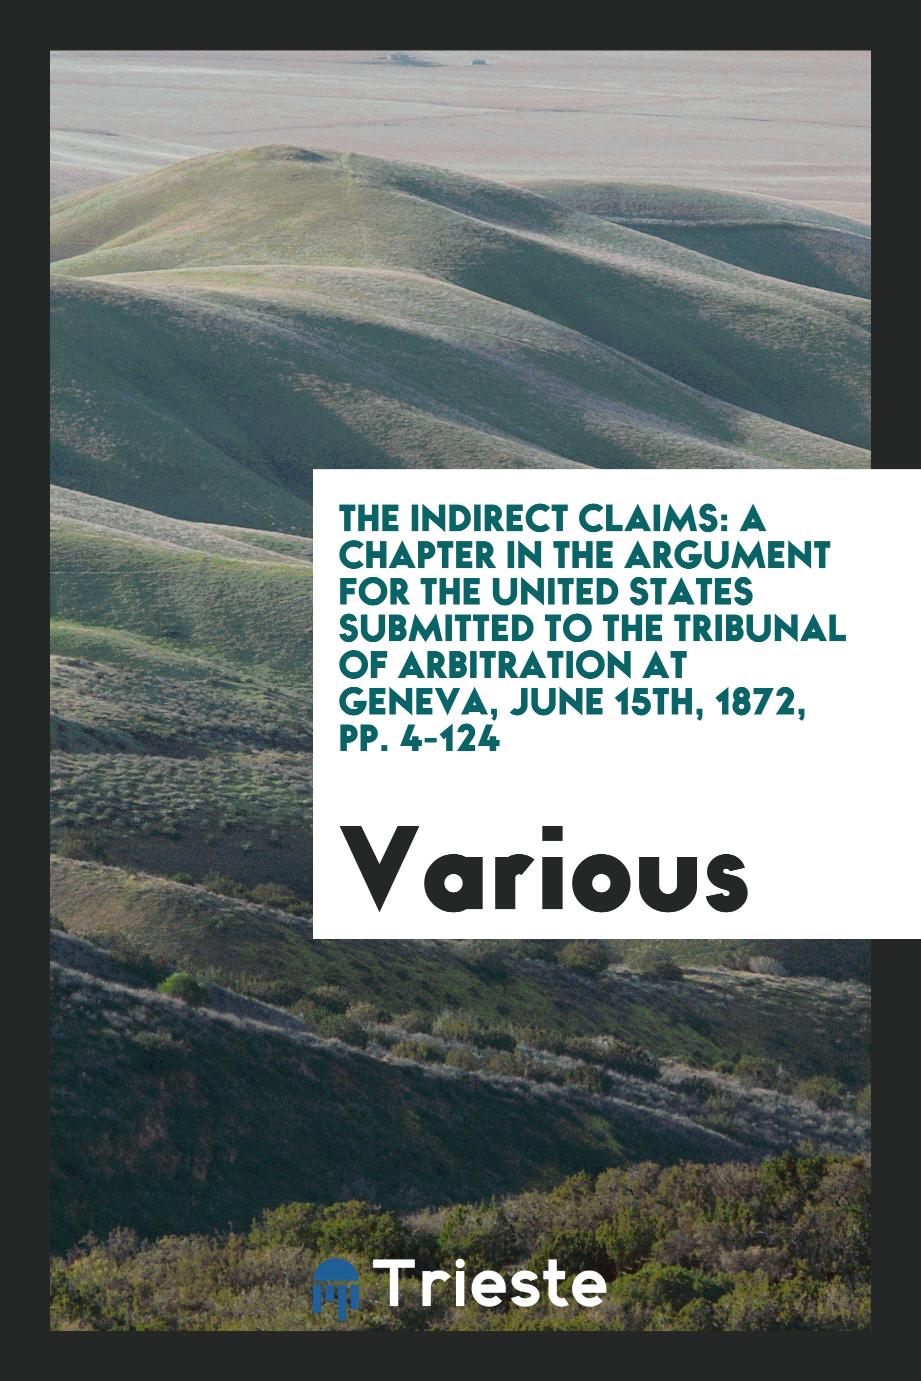 The Indirect Claims: A Chapter in the Argument for the United States Submitted to the Tribunal of Arbitration at Geneva, June 15th, 1872, pp. 4-124